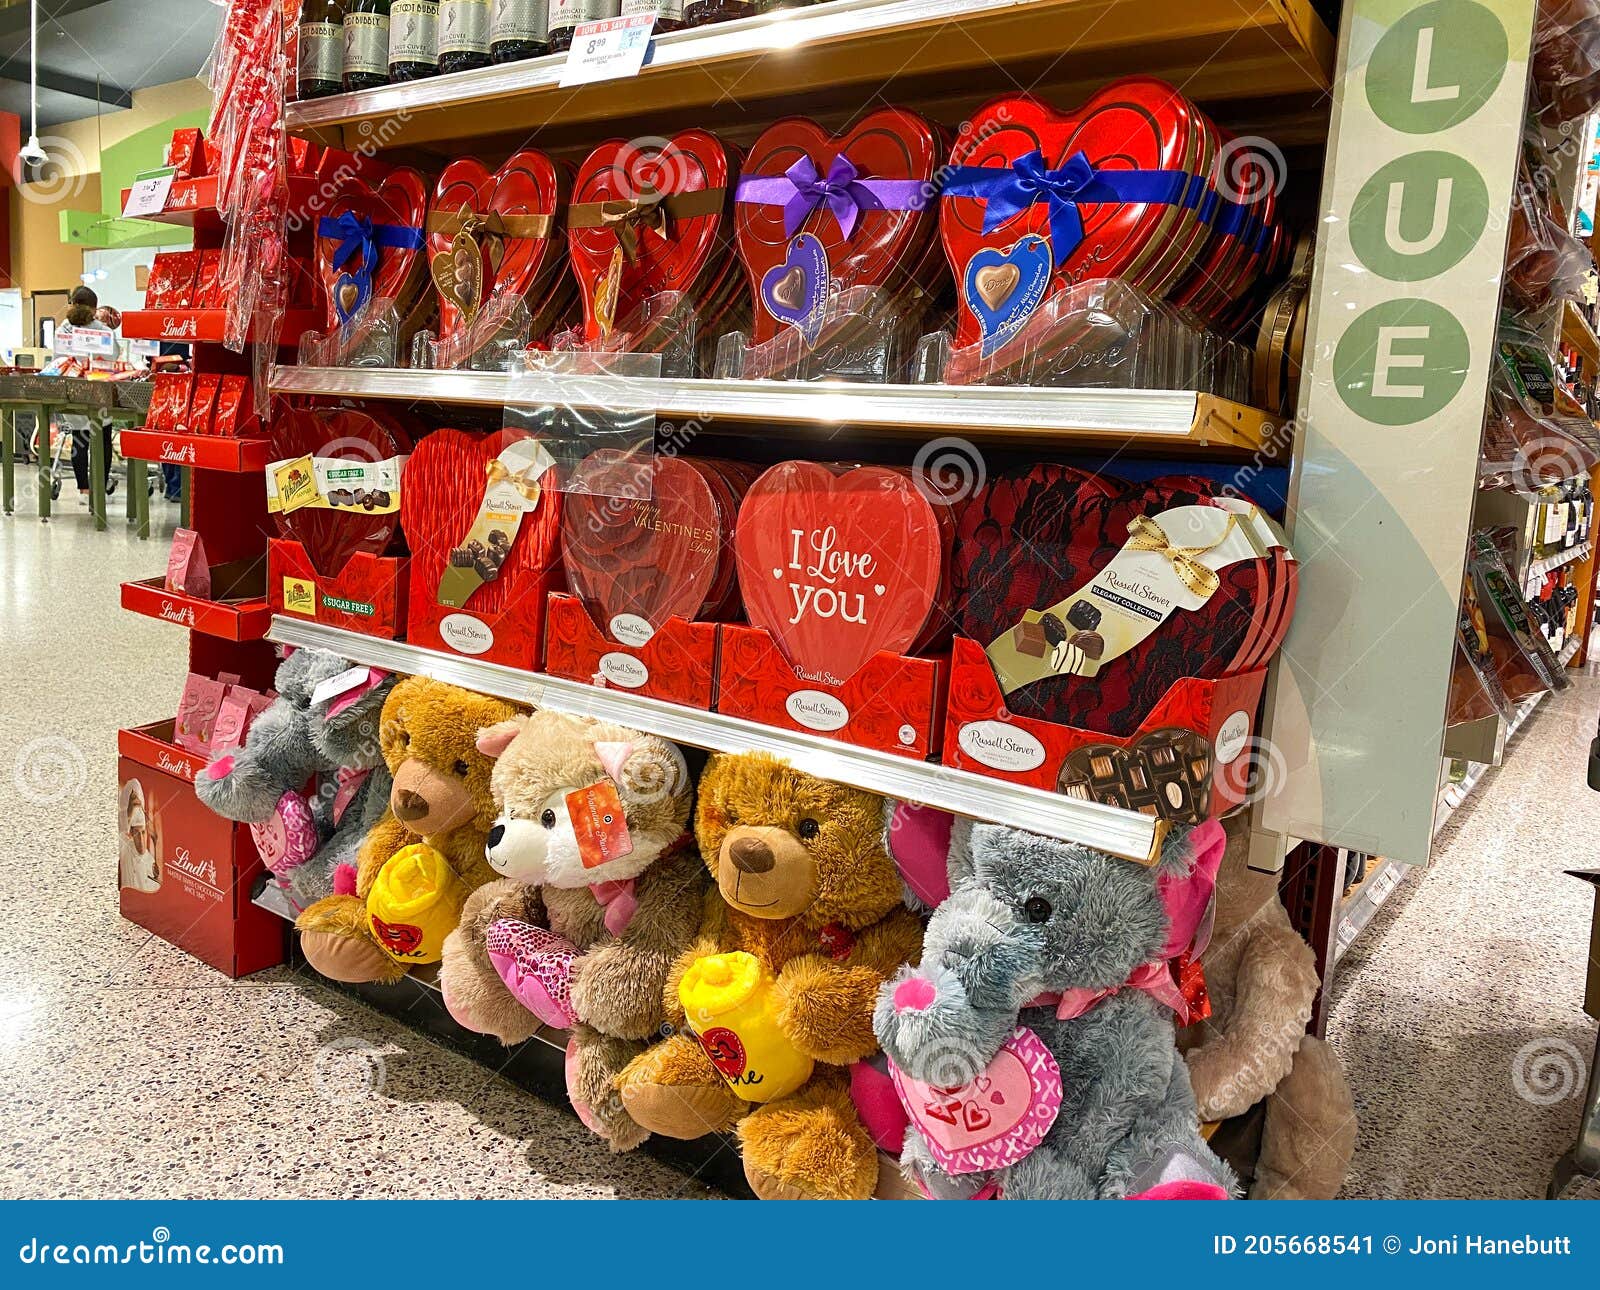 Valentines Day Gifts at the Publix Grocery Store in Orlando, Florida